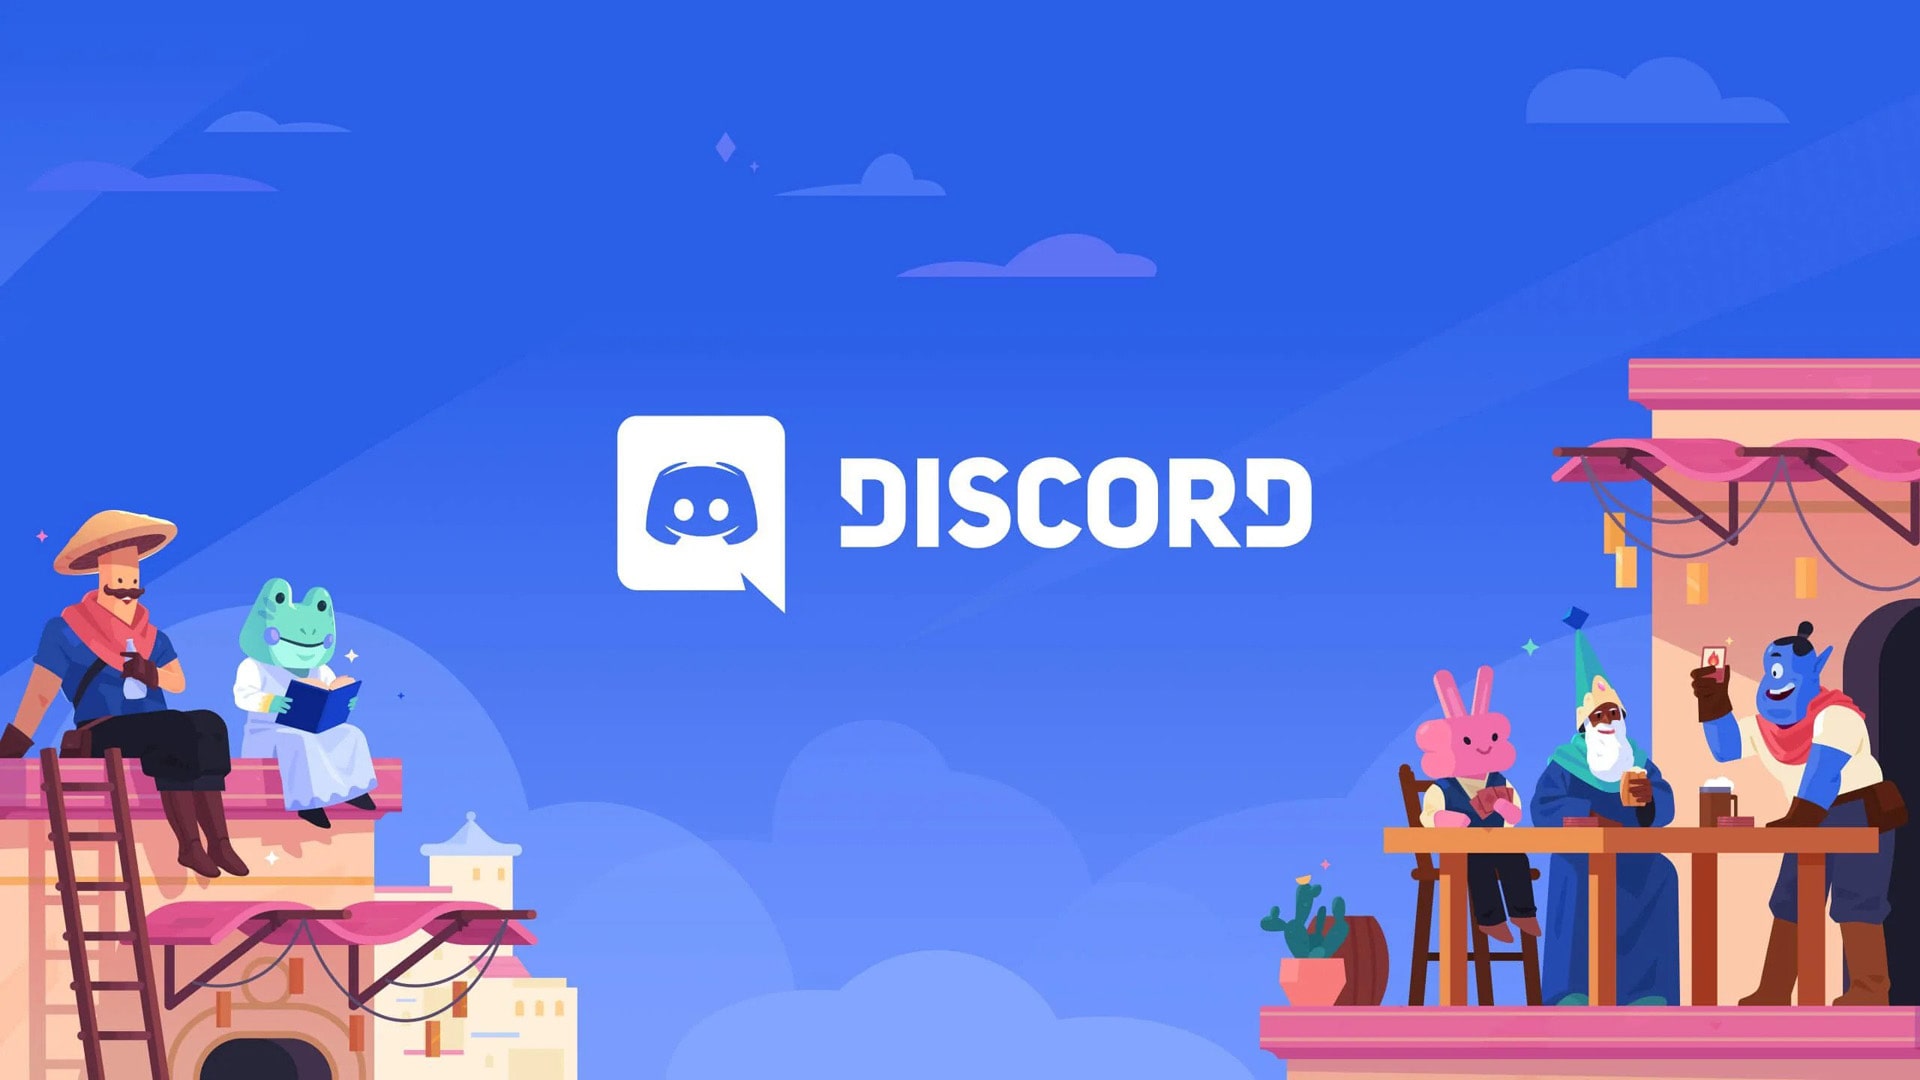 Epic Games Store community with subreddit and Discord